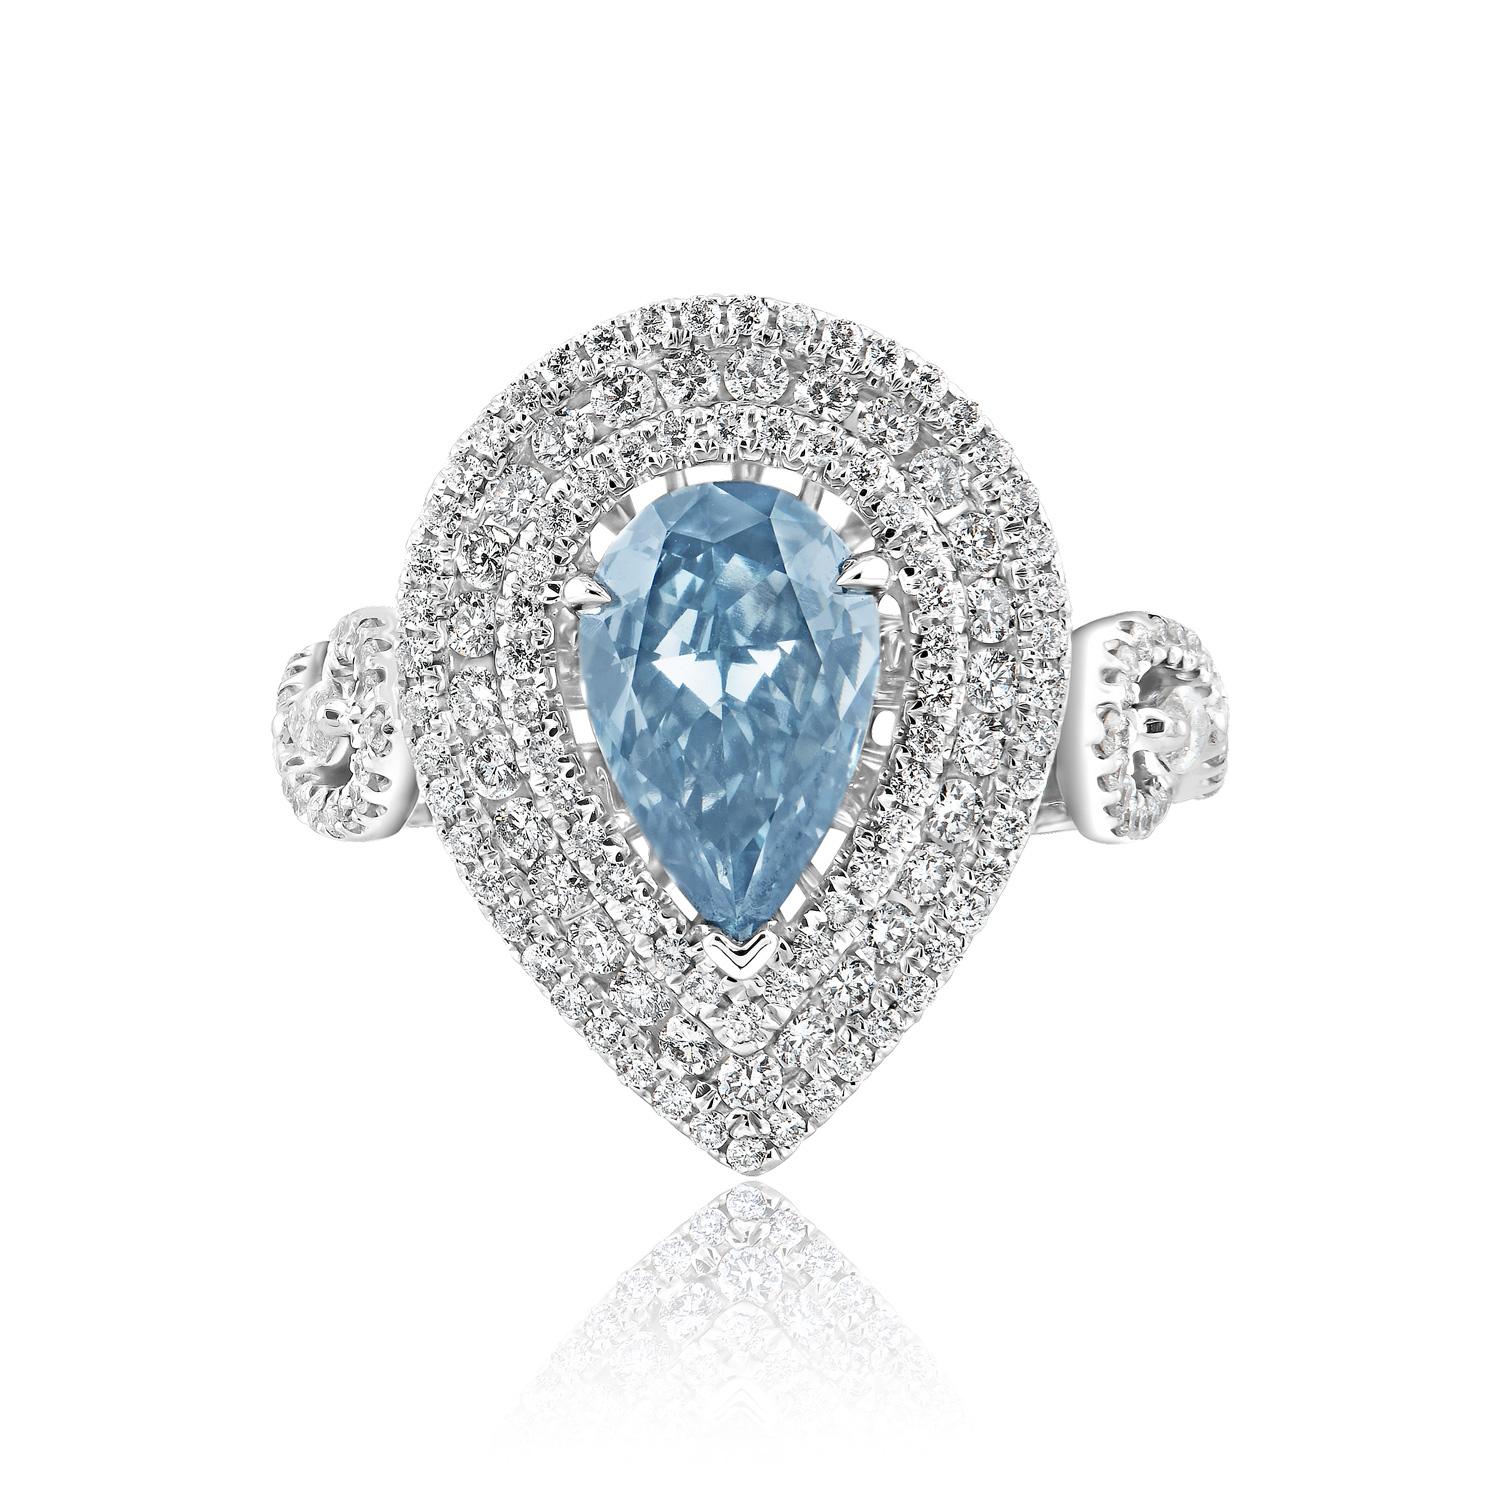 GIA CERTIFIED
Center Diamond:

Carat Weight: 1.35 Carats
Color : Fancy Intense Blue
Clarity: VS1
Style: Pear Shape

Halo Diamonds:
Diamonds: 1.10 Carats


Ring:
Metal: 18 Karat White Gold
Style: Double Halo, 4 Petite Claw Prong, Split Shank

Size: